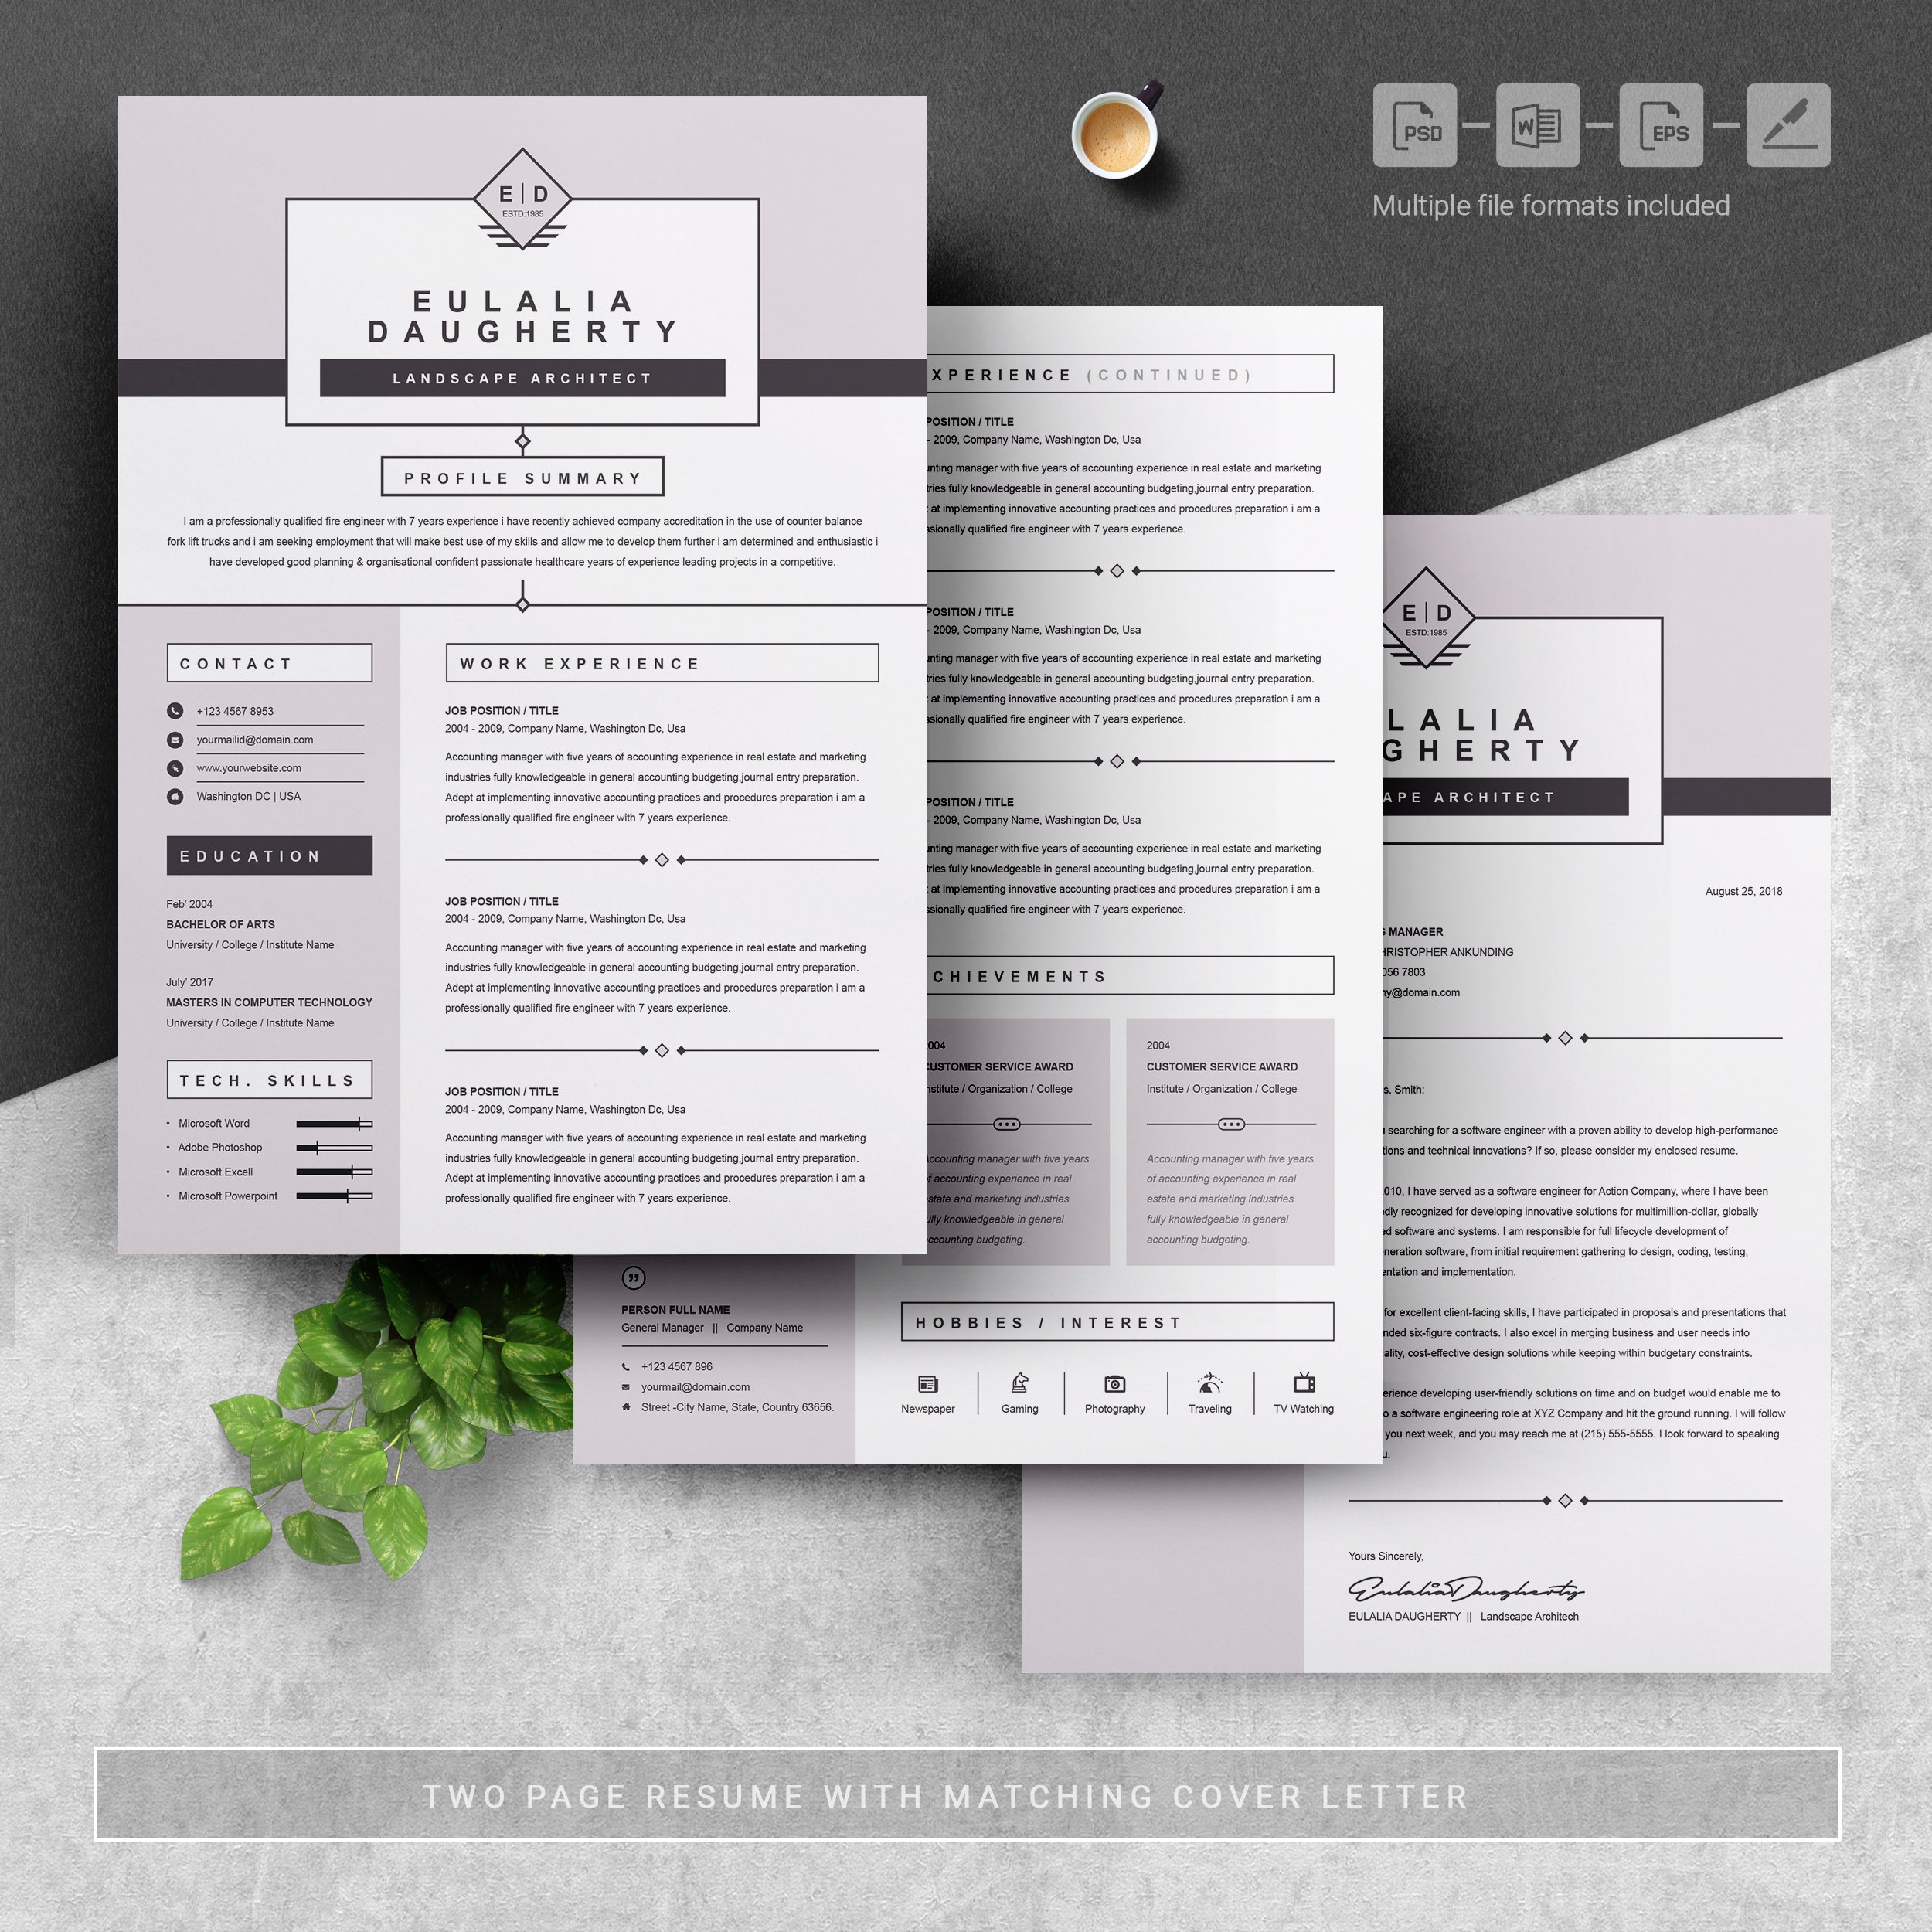 04 3 pages free resume design template 367